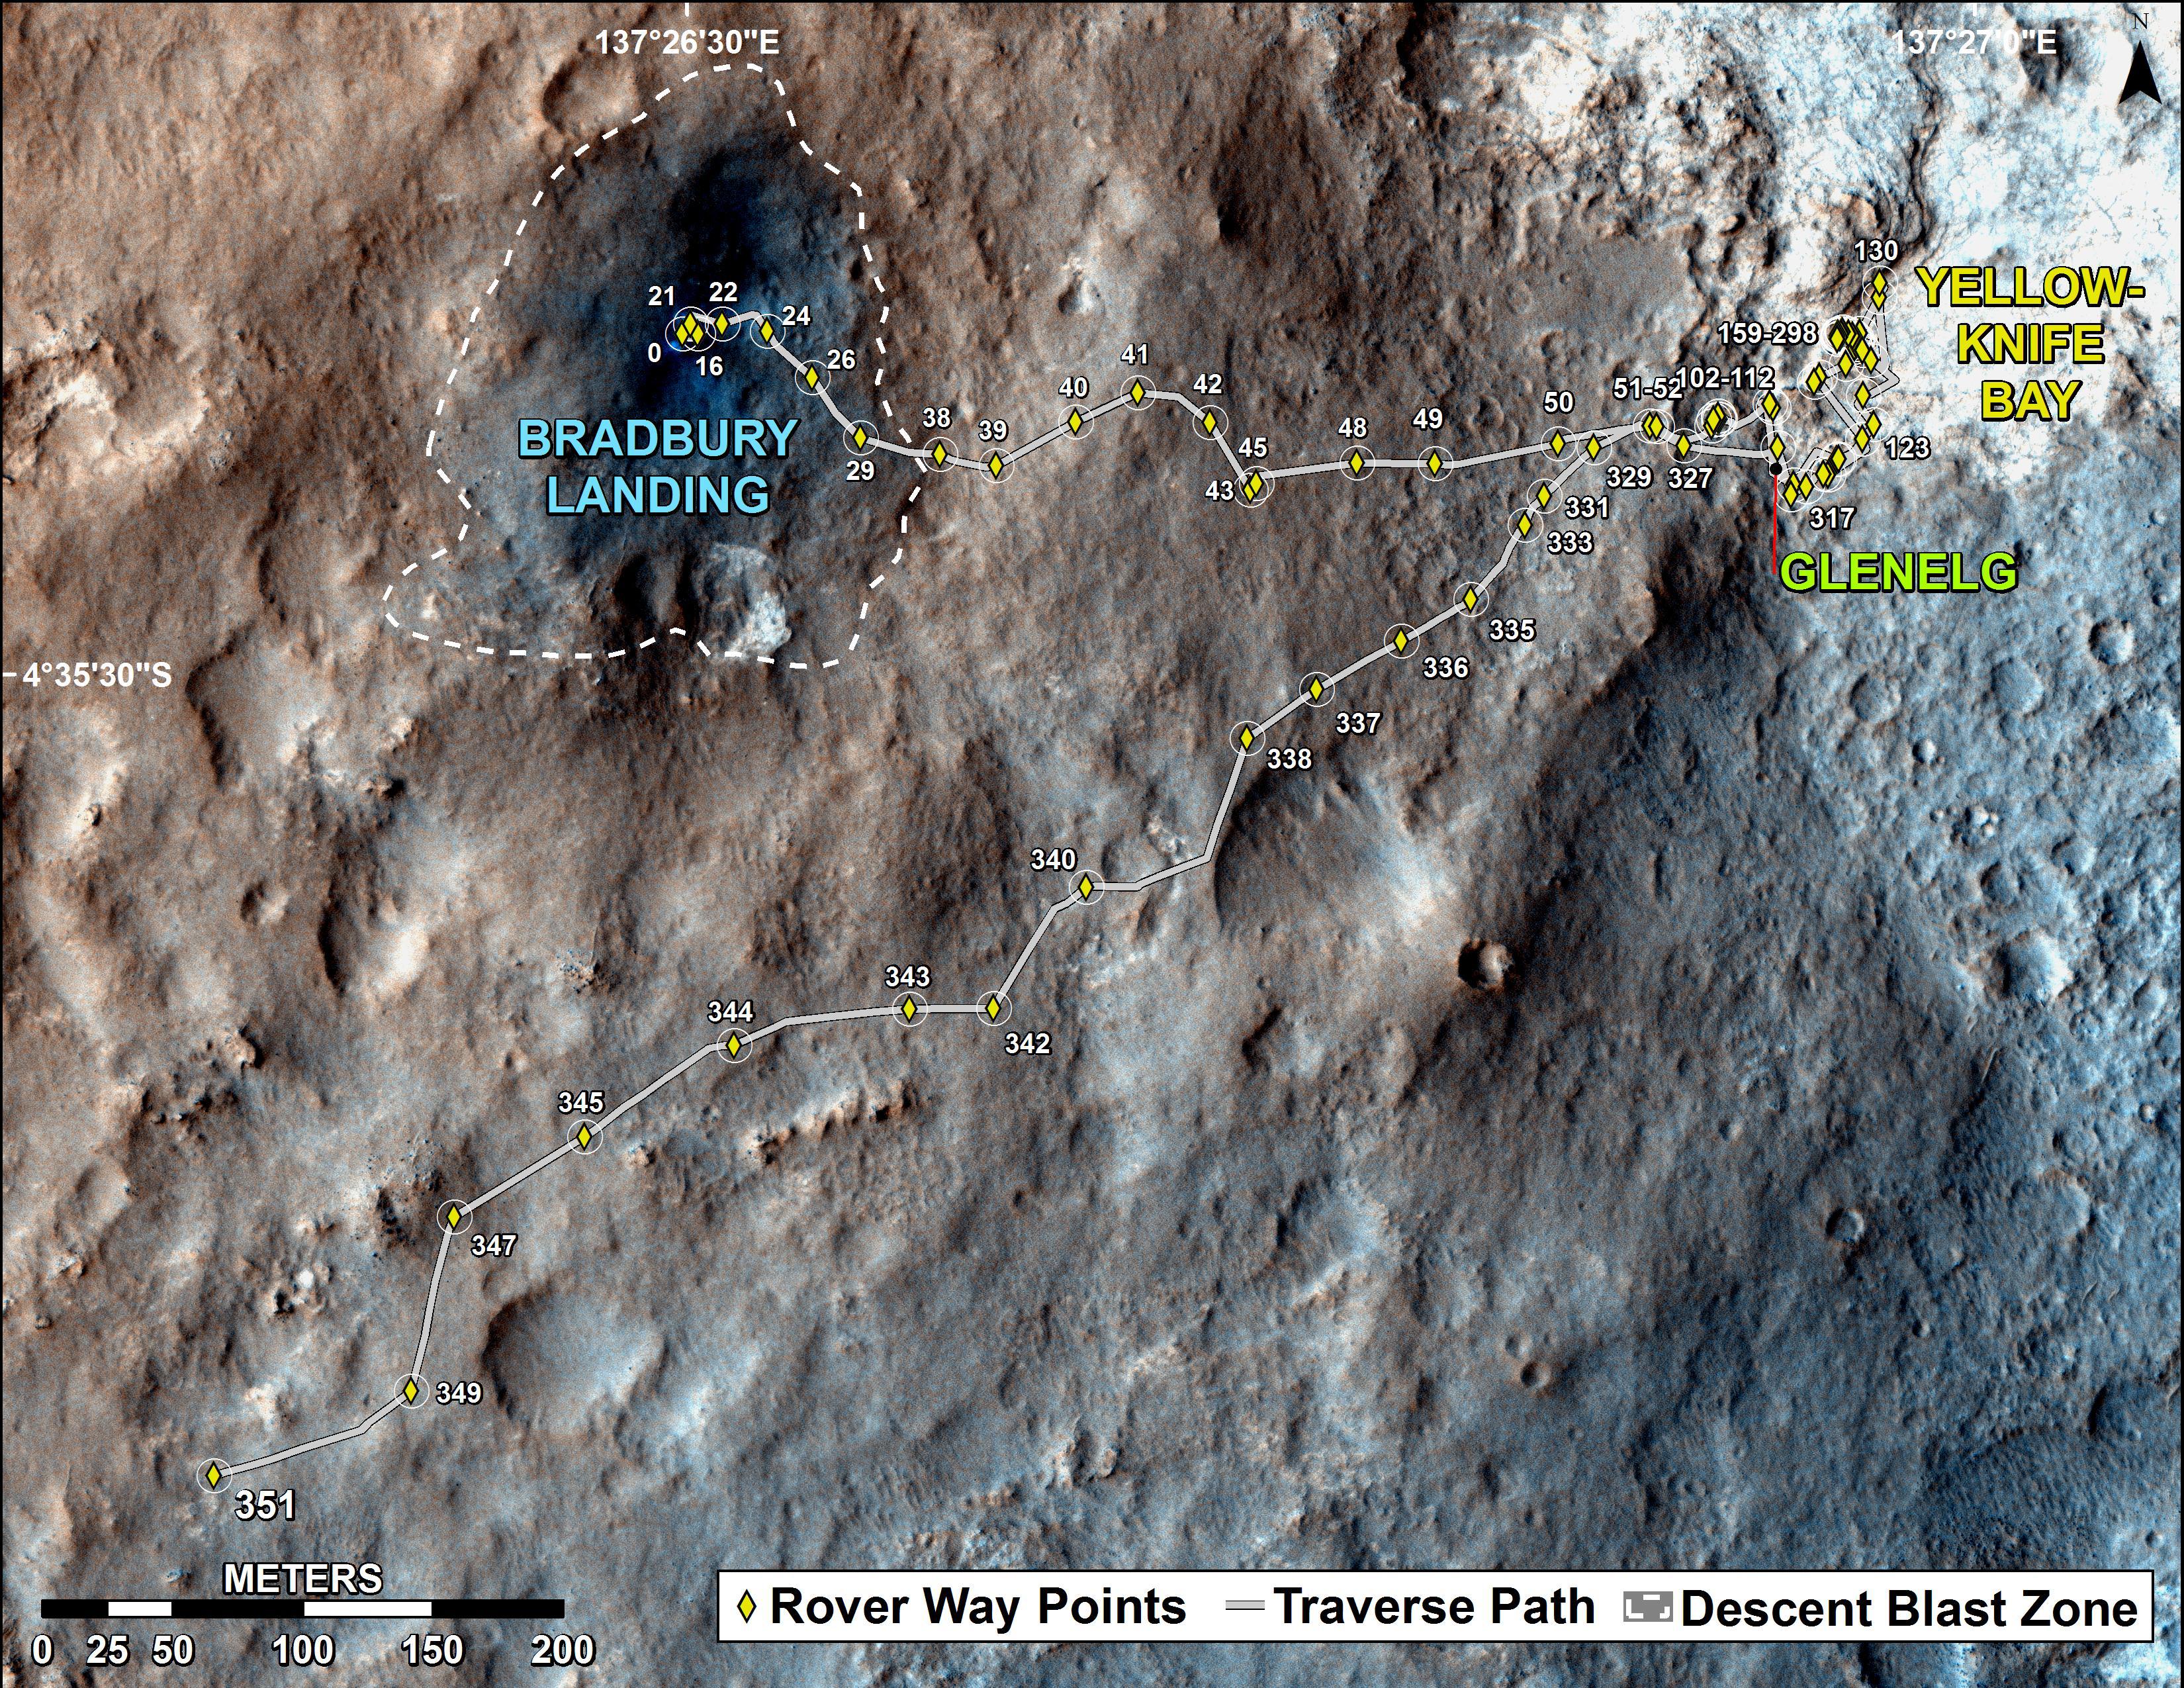 Map showing where Curiosity went in the first year Organic chemicals were found in the Yellow-knife Bay region in Sheepbed mudstone.